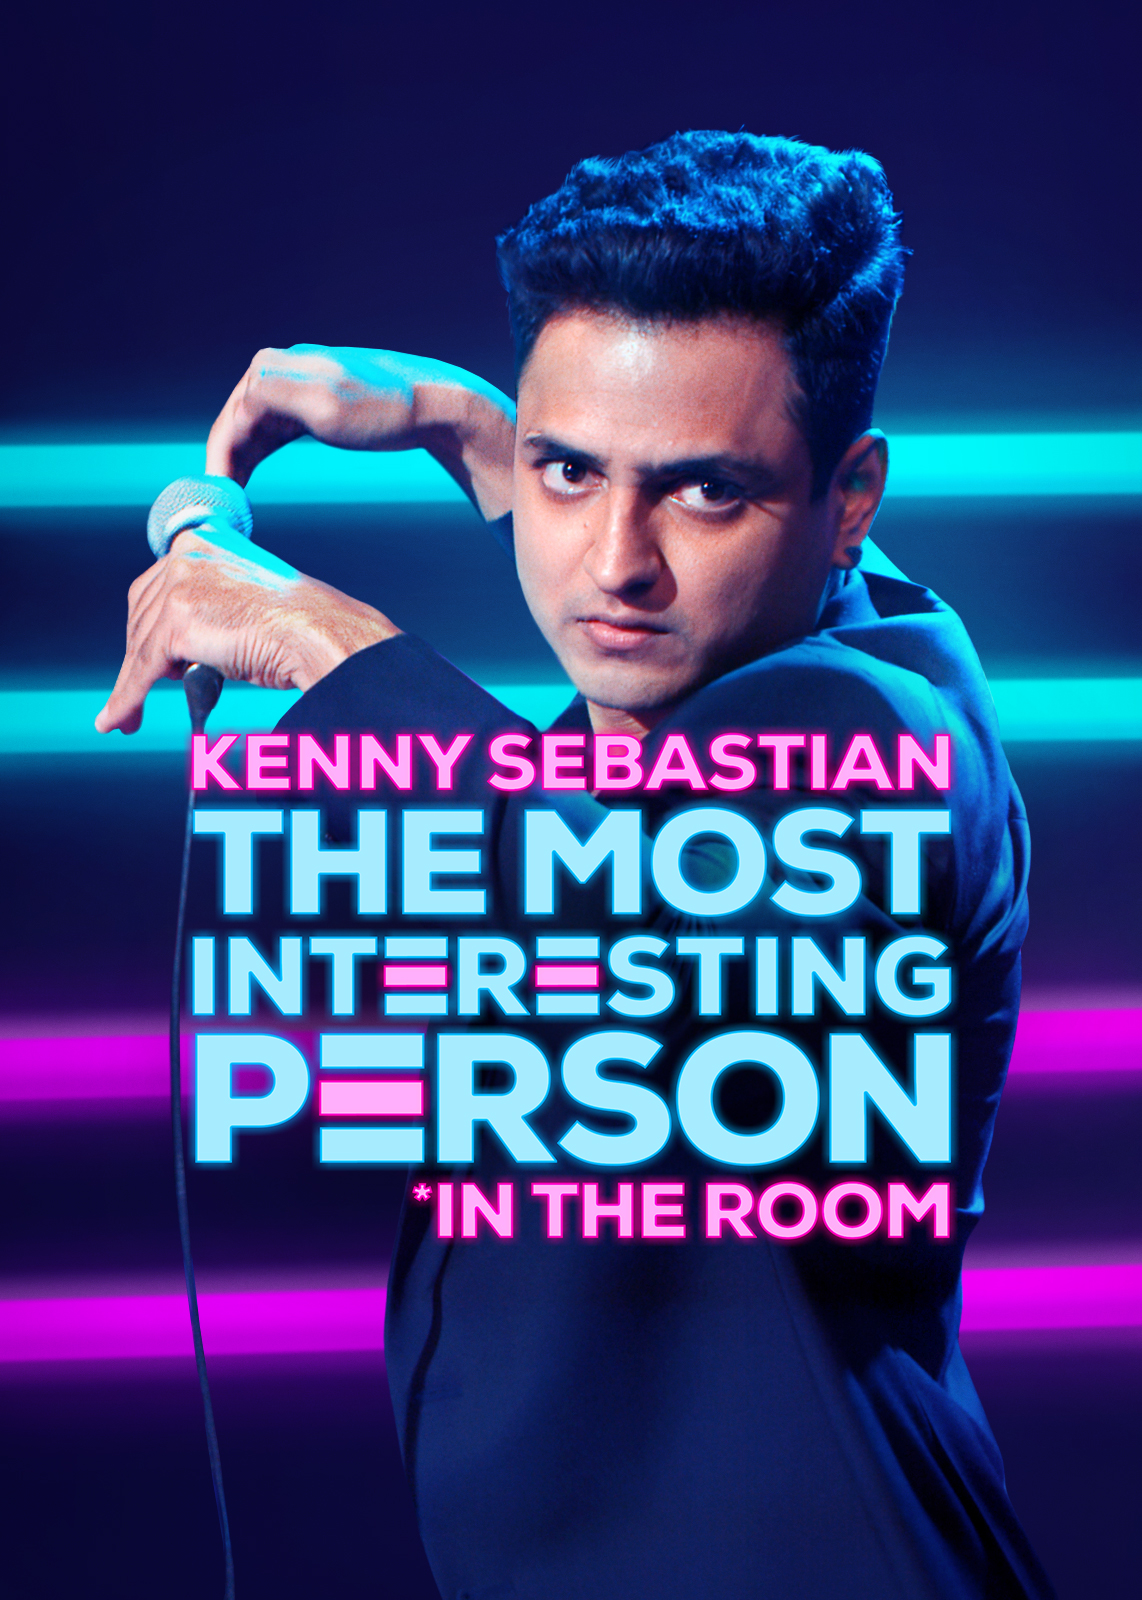 The Most Interesting Person in the Room by Kenny Sebastian (2020)